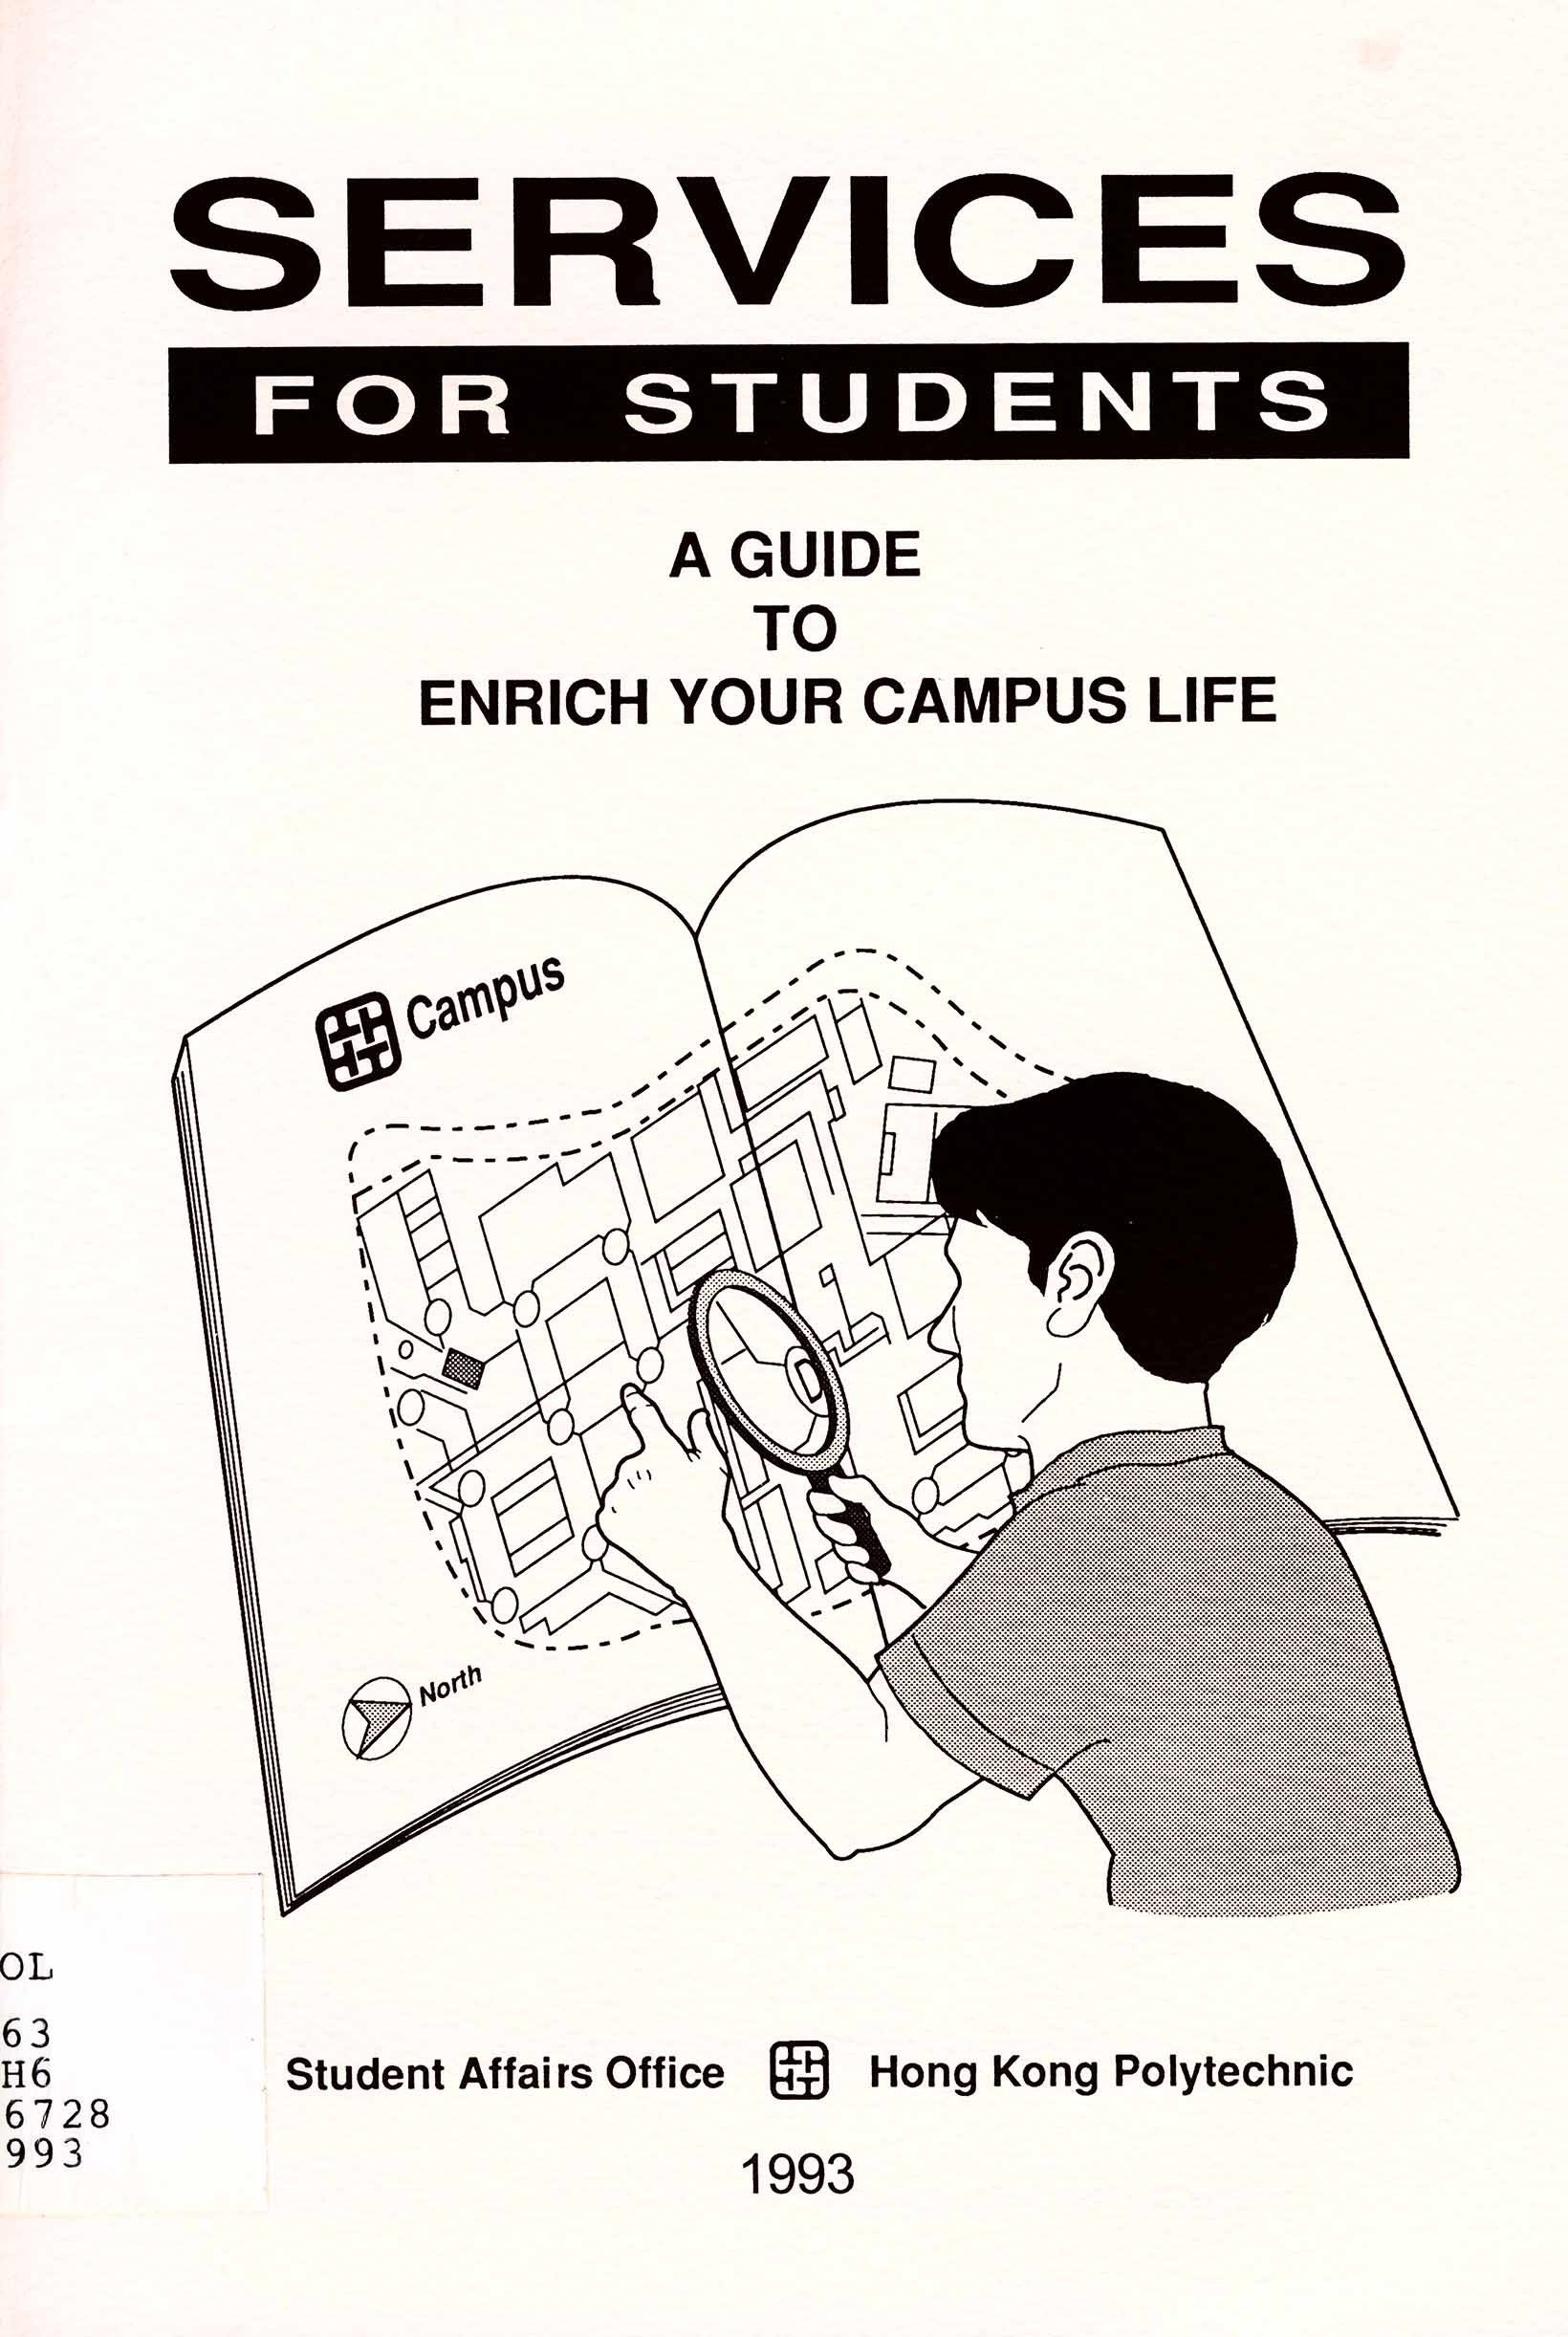 Services for students : a guide to enrich your campus life [1993]